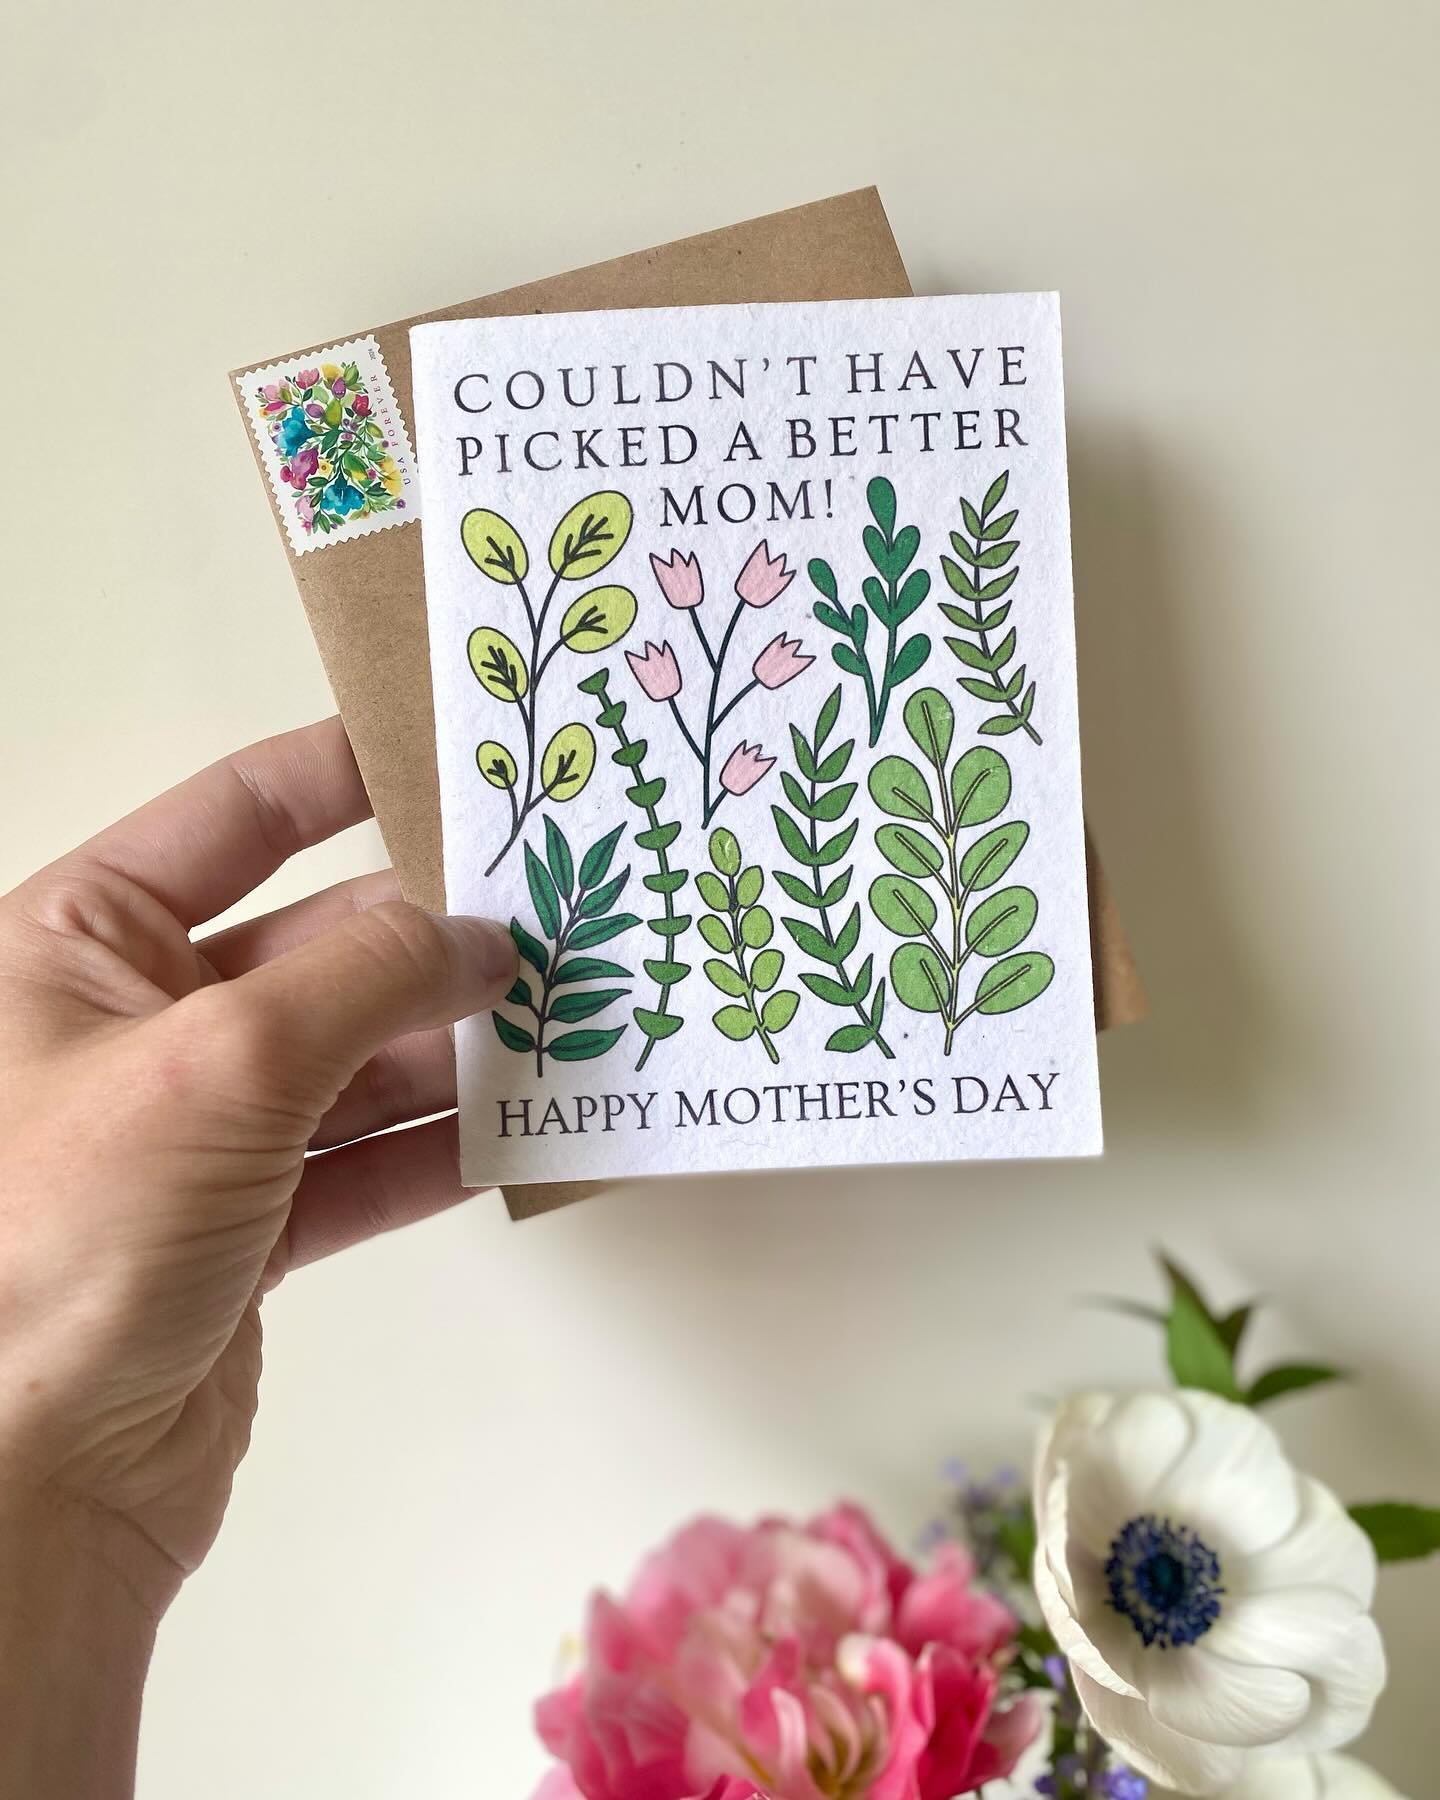 Swipe to see all the details on the sweetest PLANTABLE Mother&rsquo;s Day card that she can literally grow instead of throwing away 🥰 

🌸 Embedded with mixed (non-invasive) flower seeds
🌸 Include with a flower delivery, pick it up at our Mother&rs